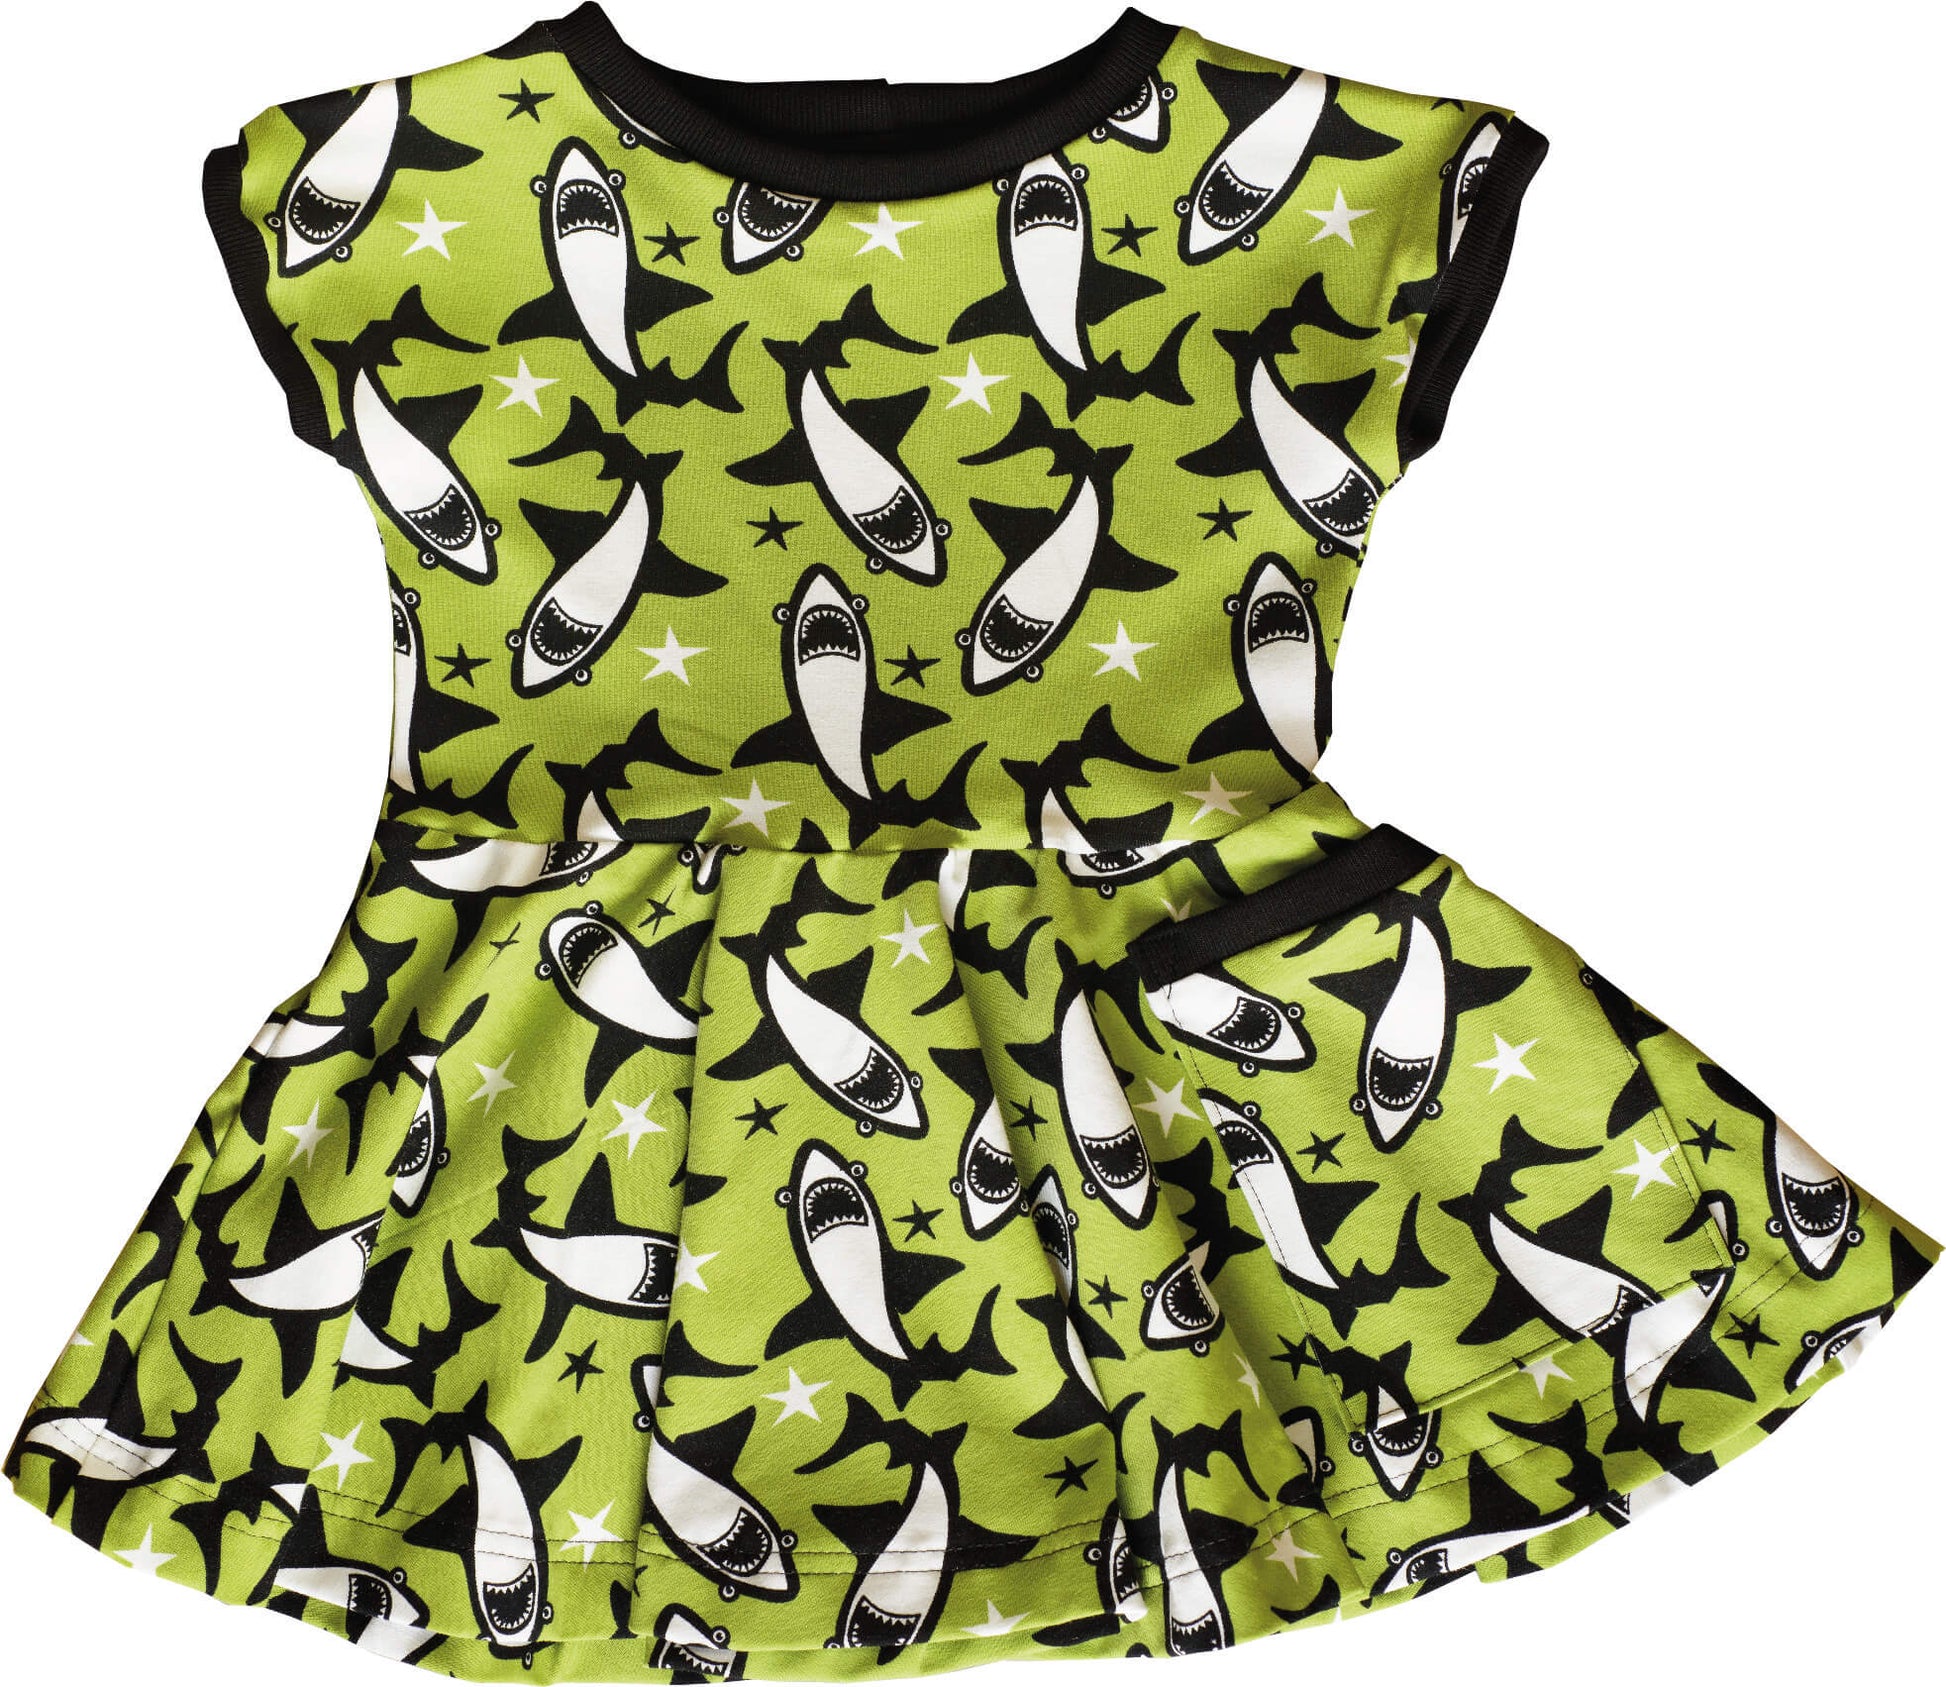 skater dress for baby and kids in a green with sharks print. Flowy skirt and pocket included.